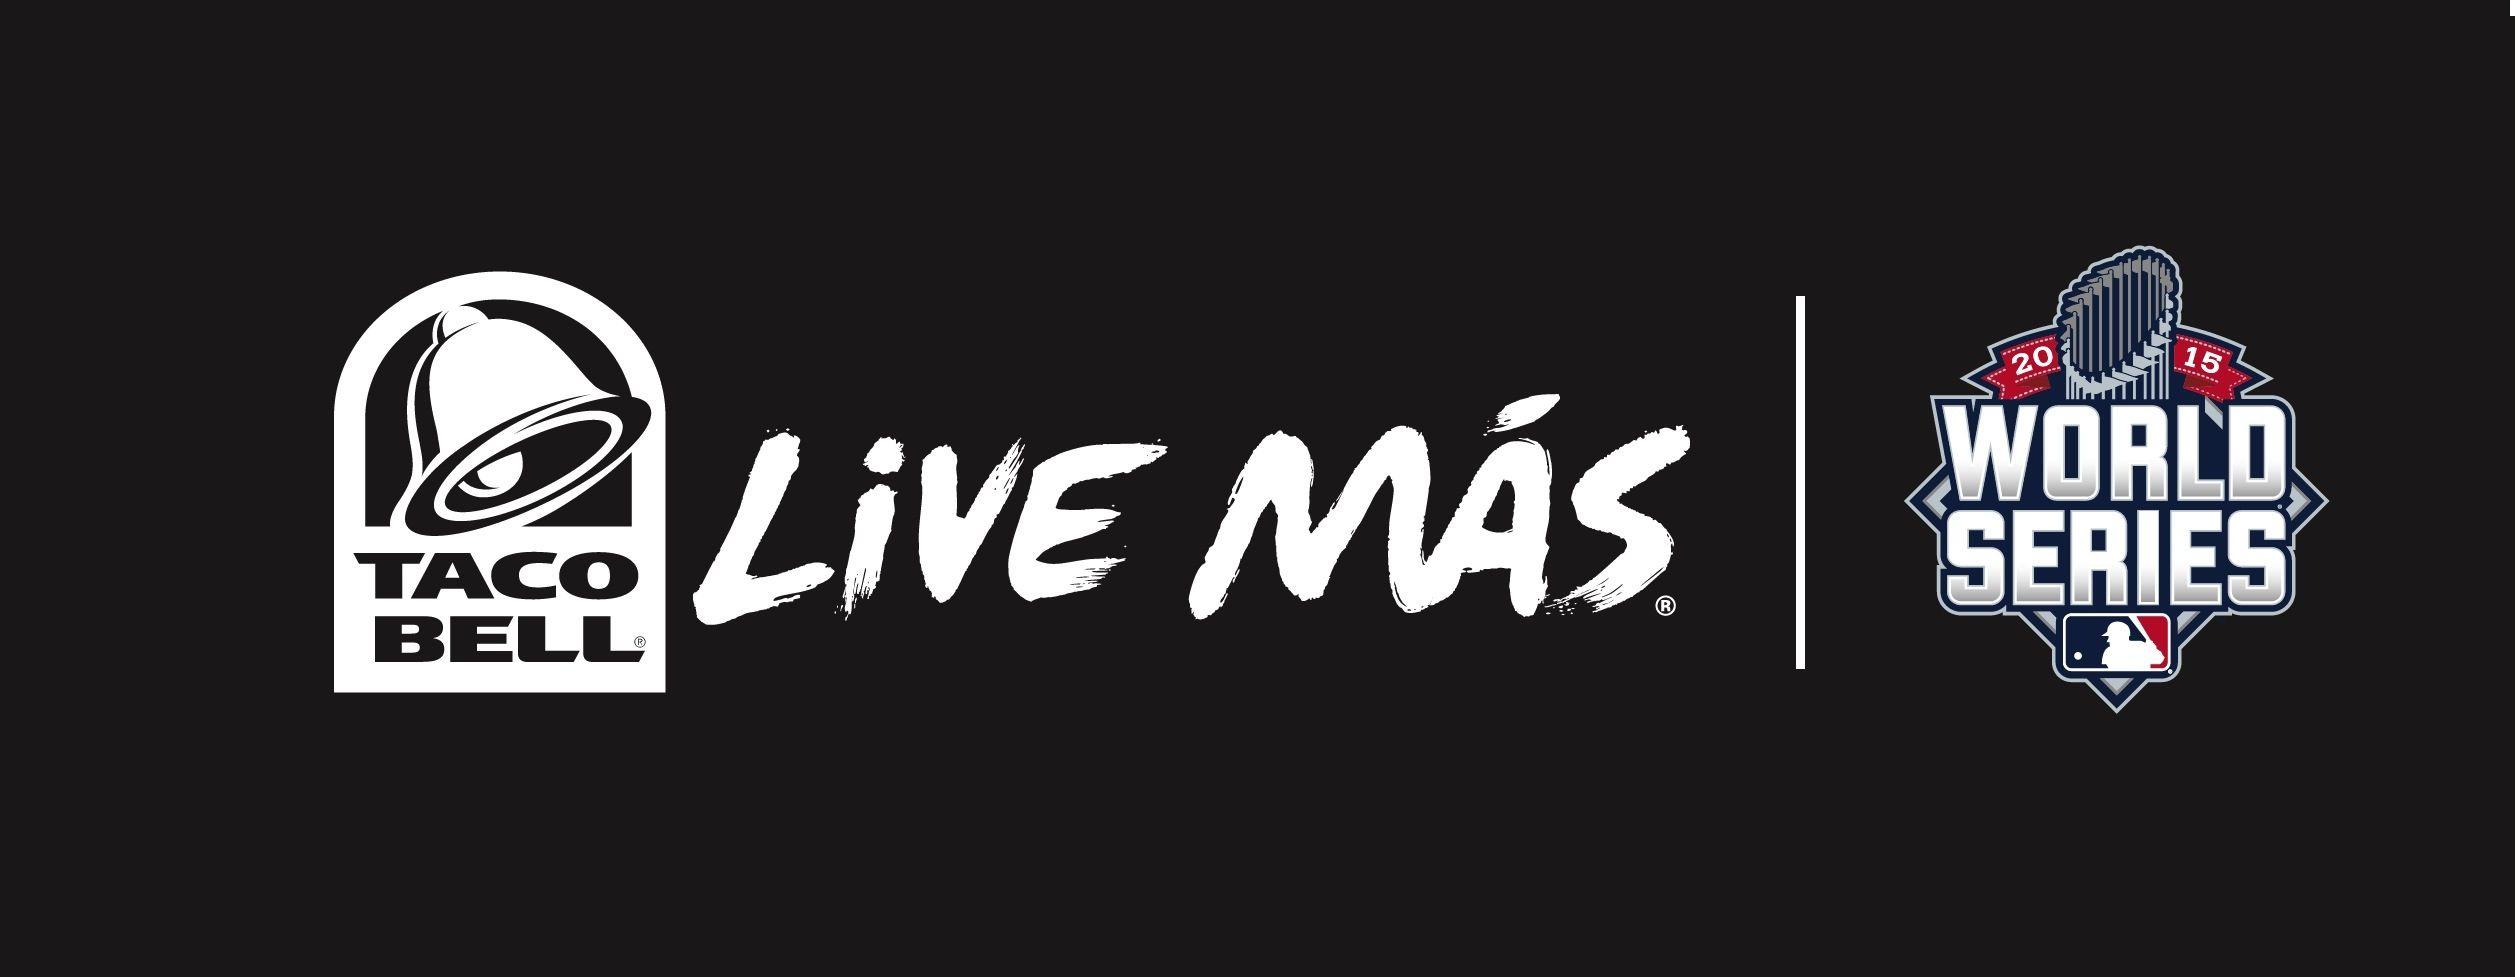 Taco Bell Live Mas Logo - First Player to Steal a Base During the World Series Will Earn